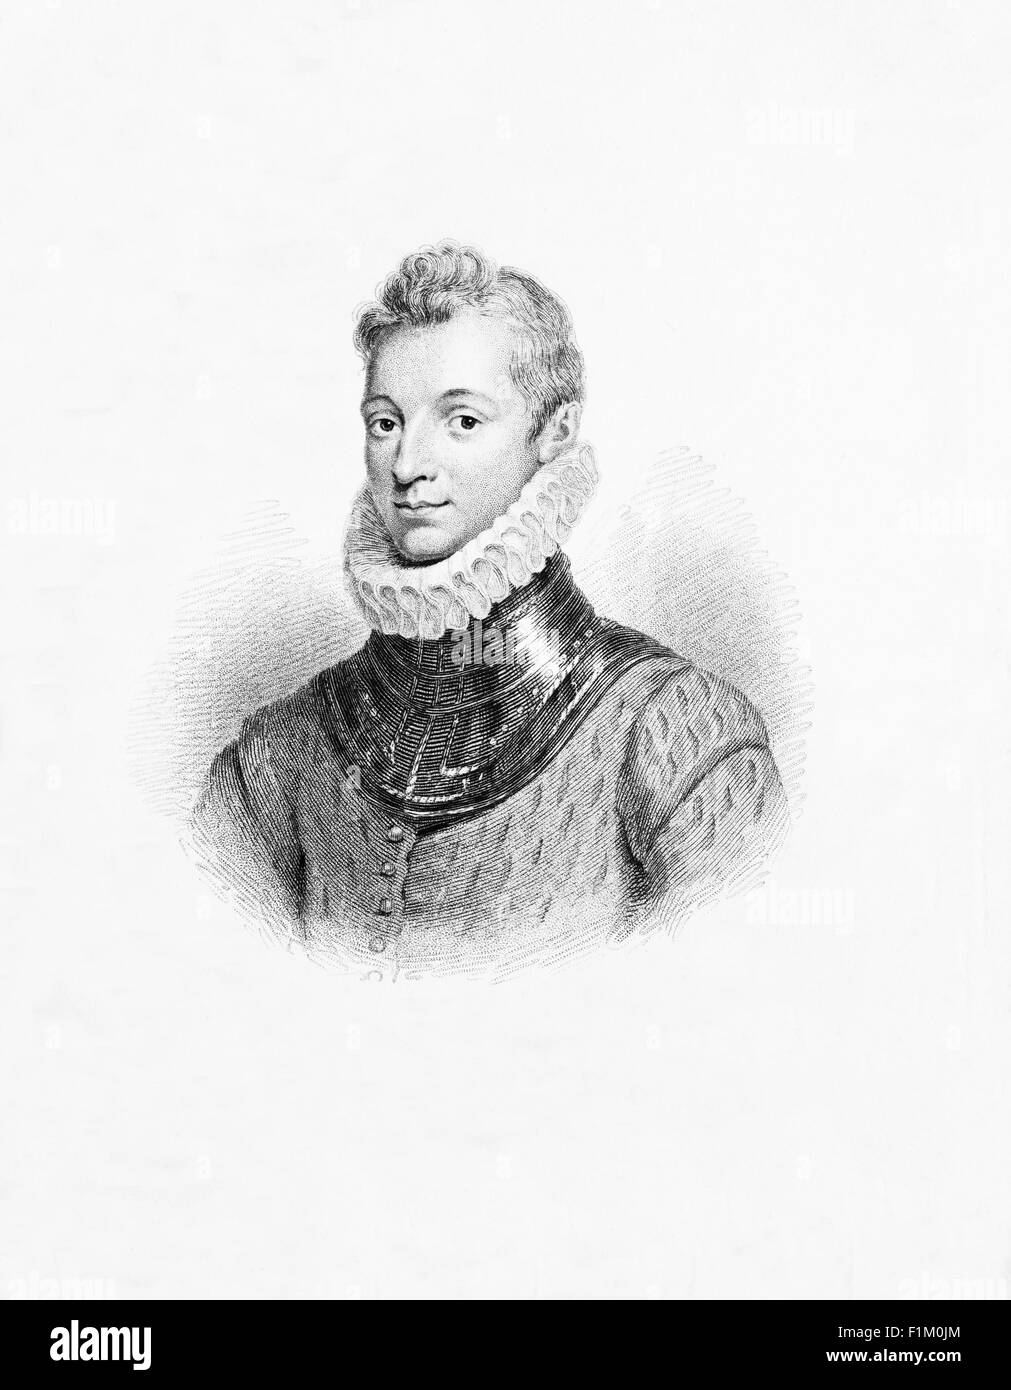 Sir Philip Sidney (1554 – 1586) an English poet, courtier and soldier, Remembered as one of the most prominent figures of the Elizabethan Age. Stock Photo